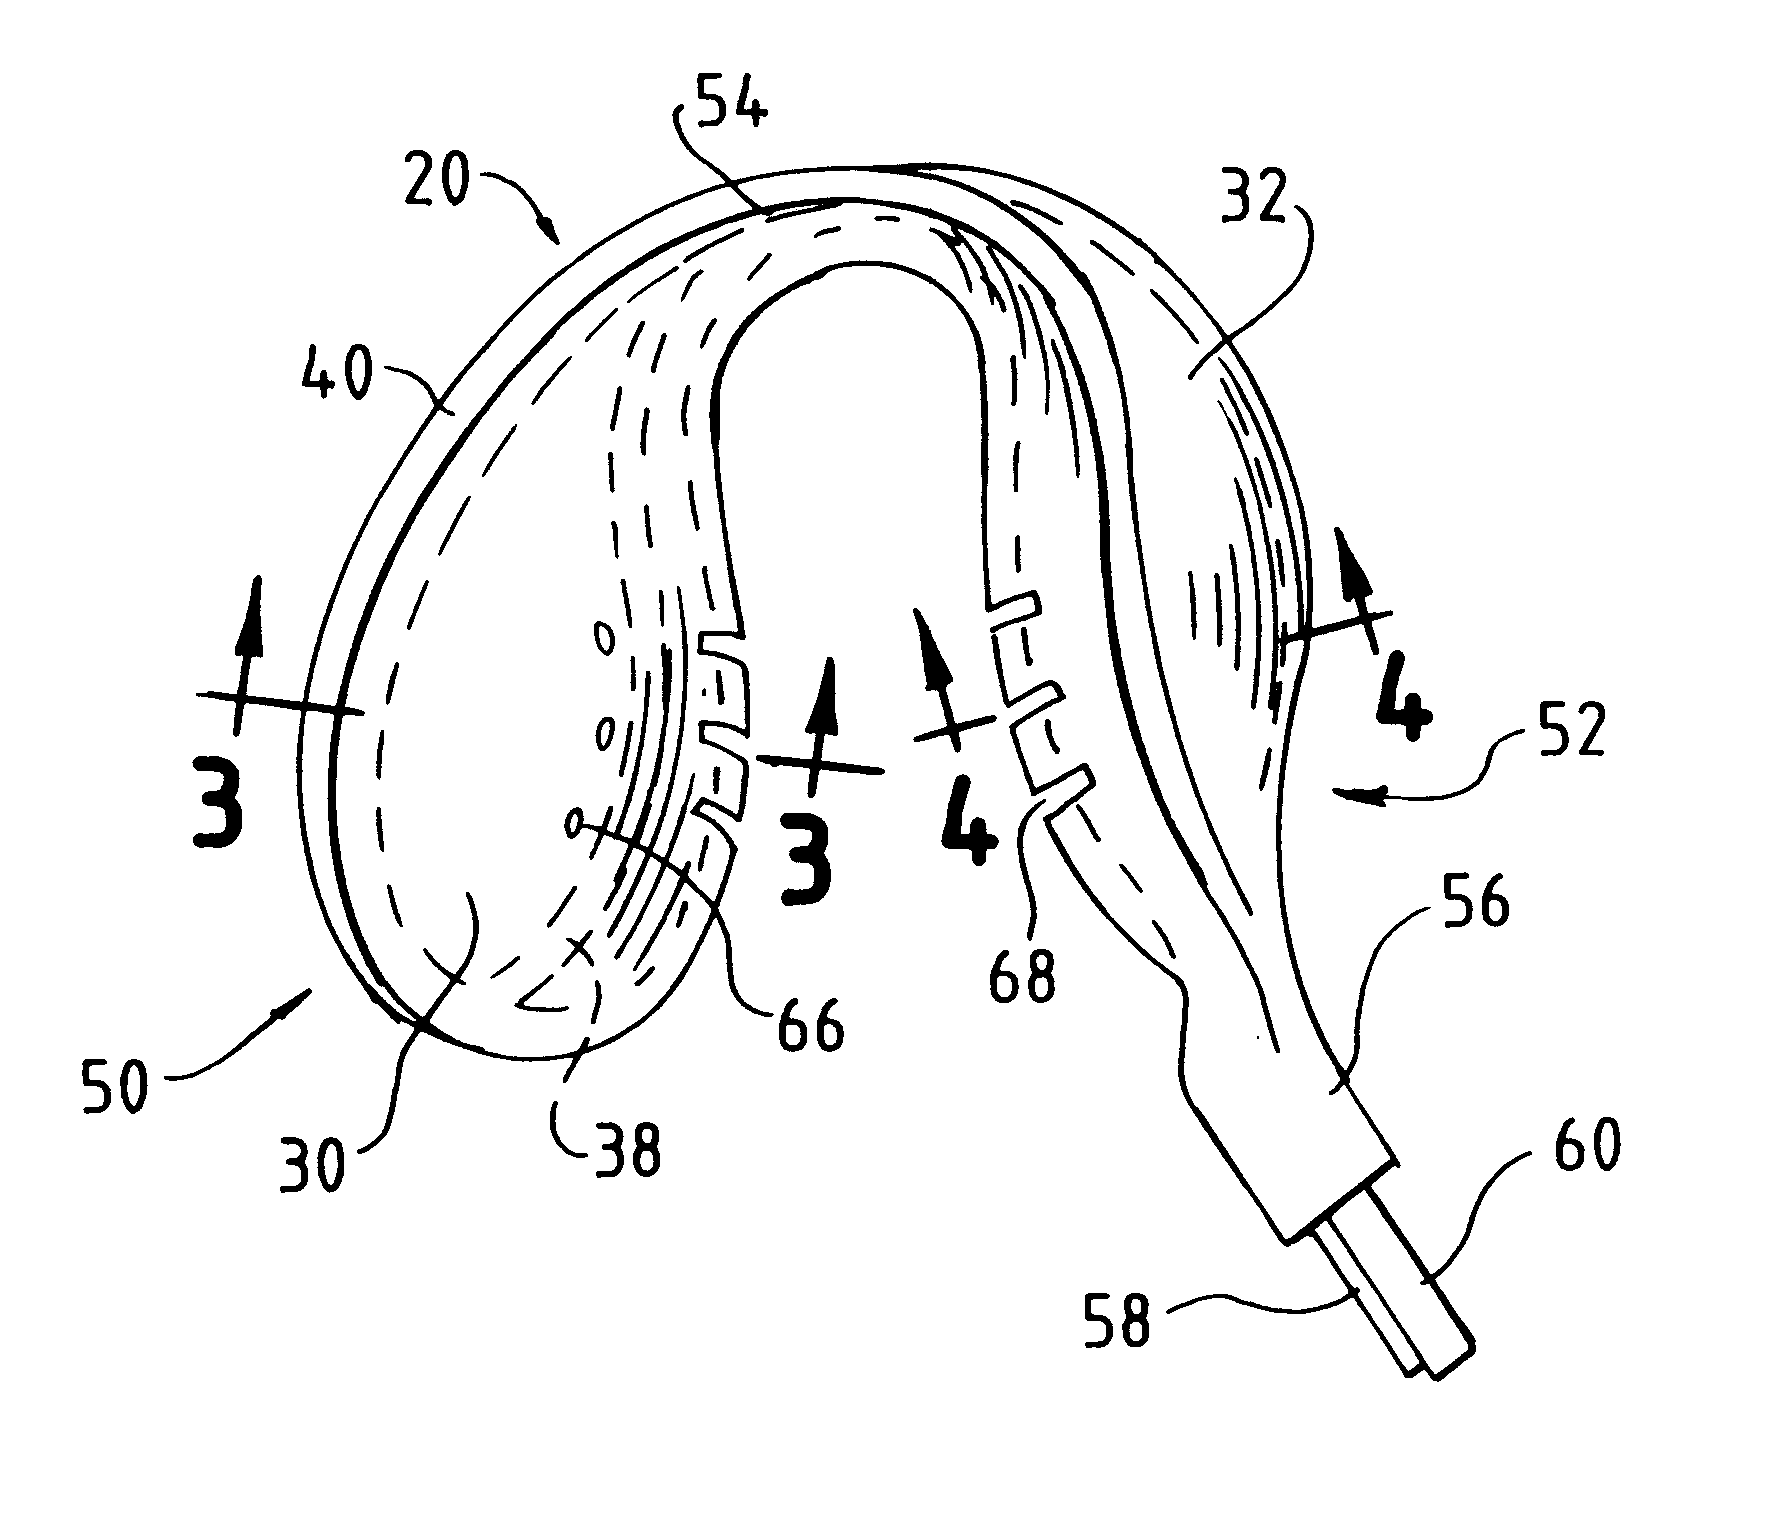 Oral isolation device with evacuation chambers